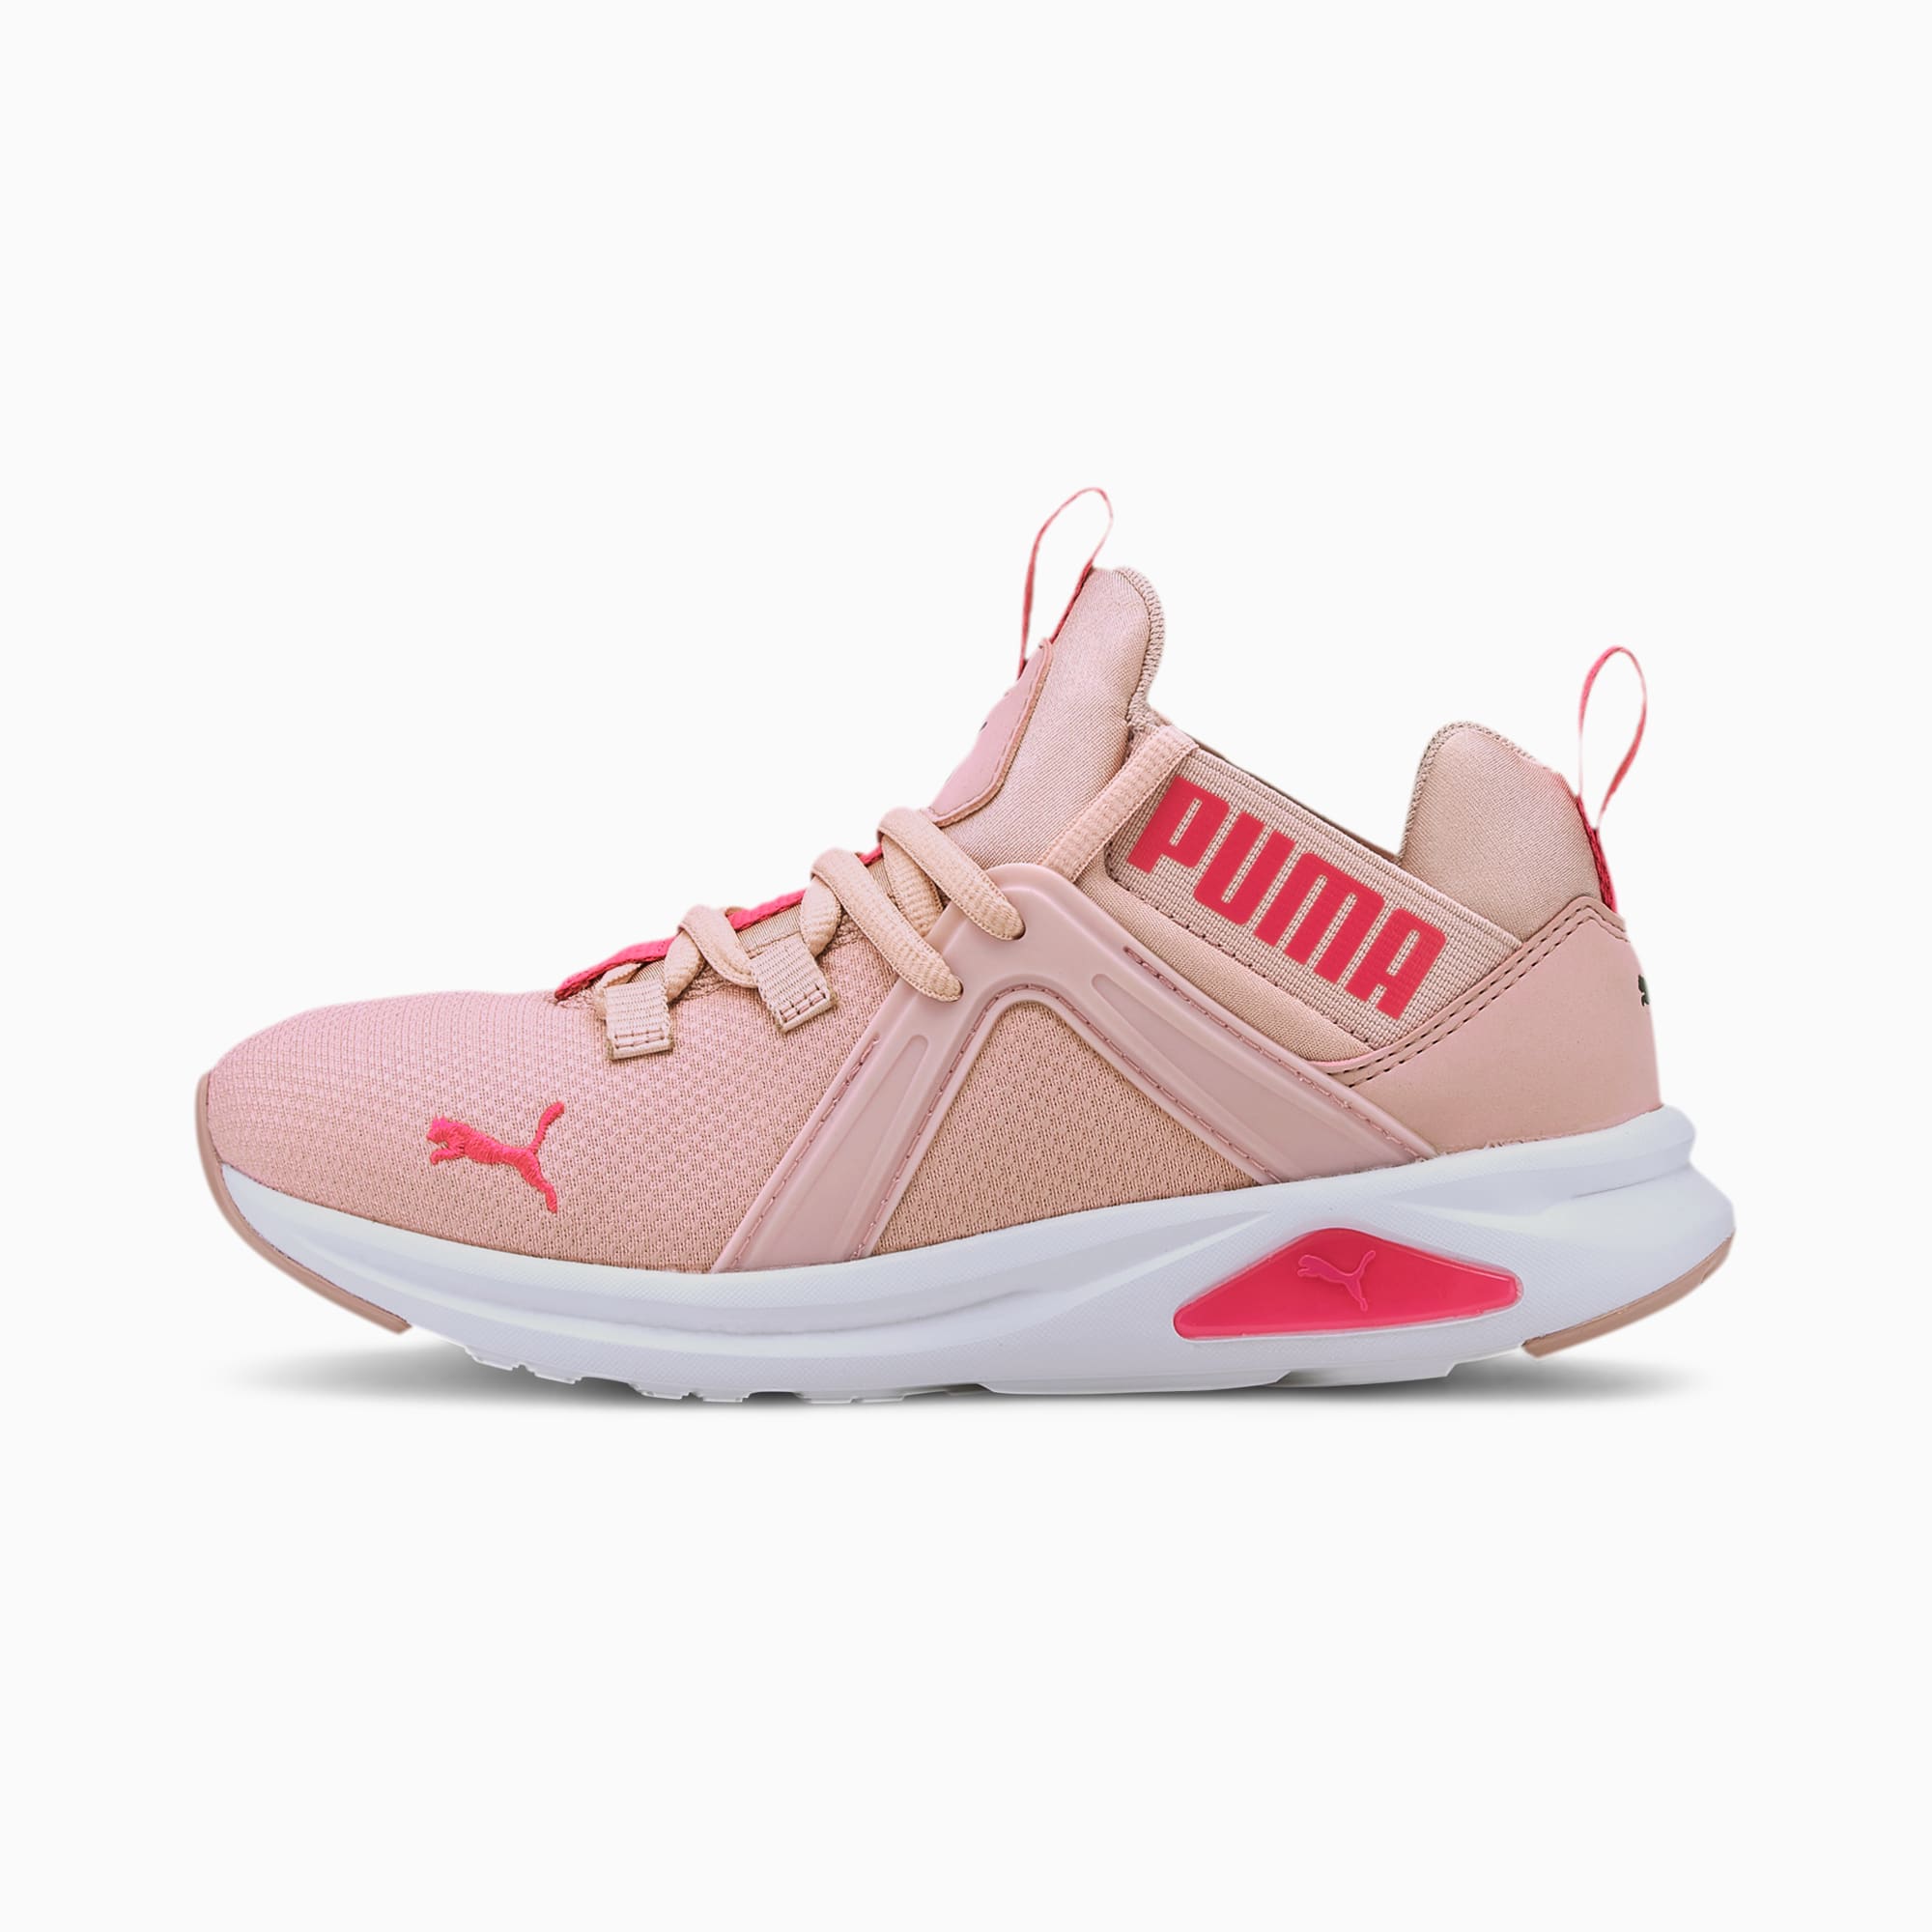 PUMA Chaussure Basket Enzo 2 Glow Youth pour Enfant, Rose, Taille 35.5, Chaussures